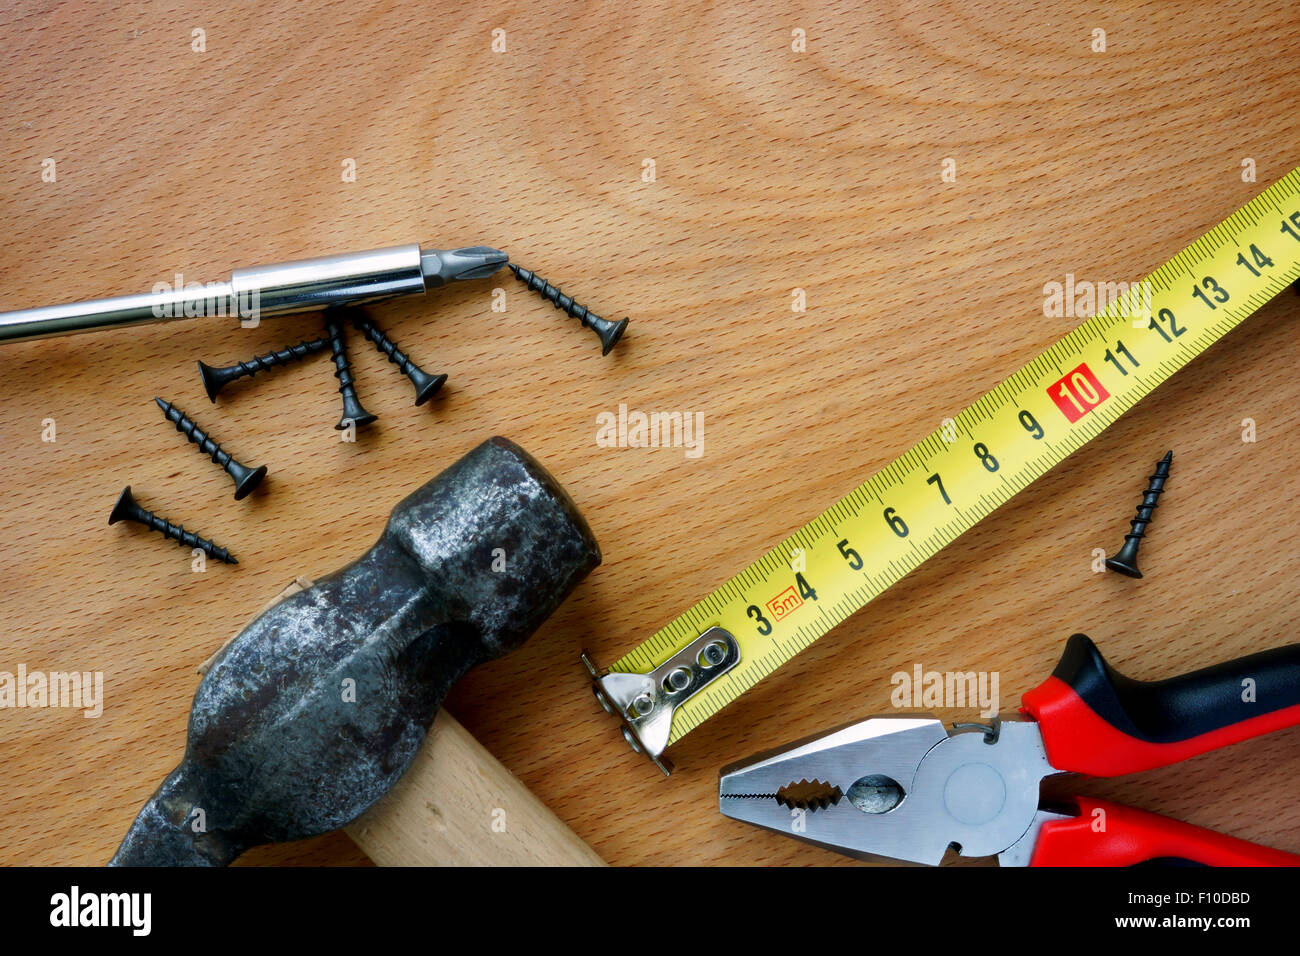 Tools kit on a wood background. Home improvement concept. Stock Photo